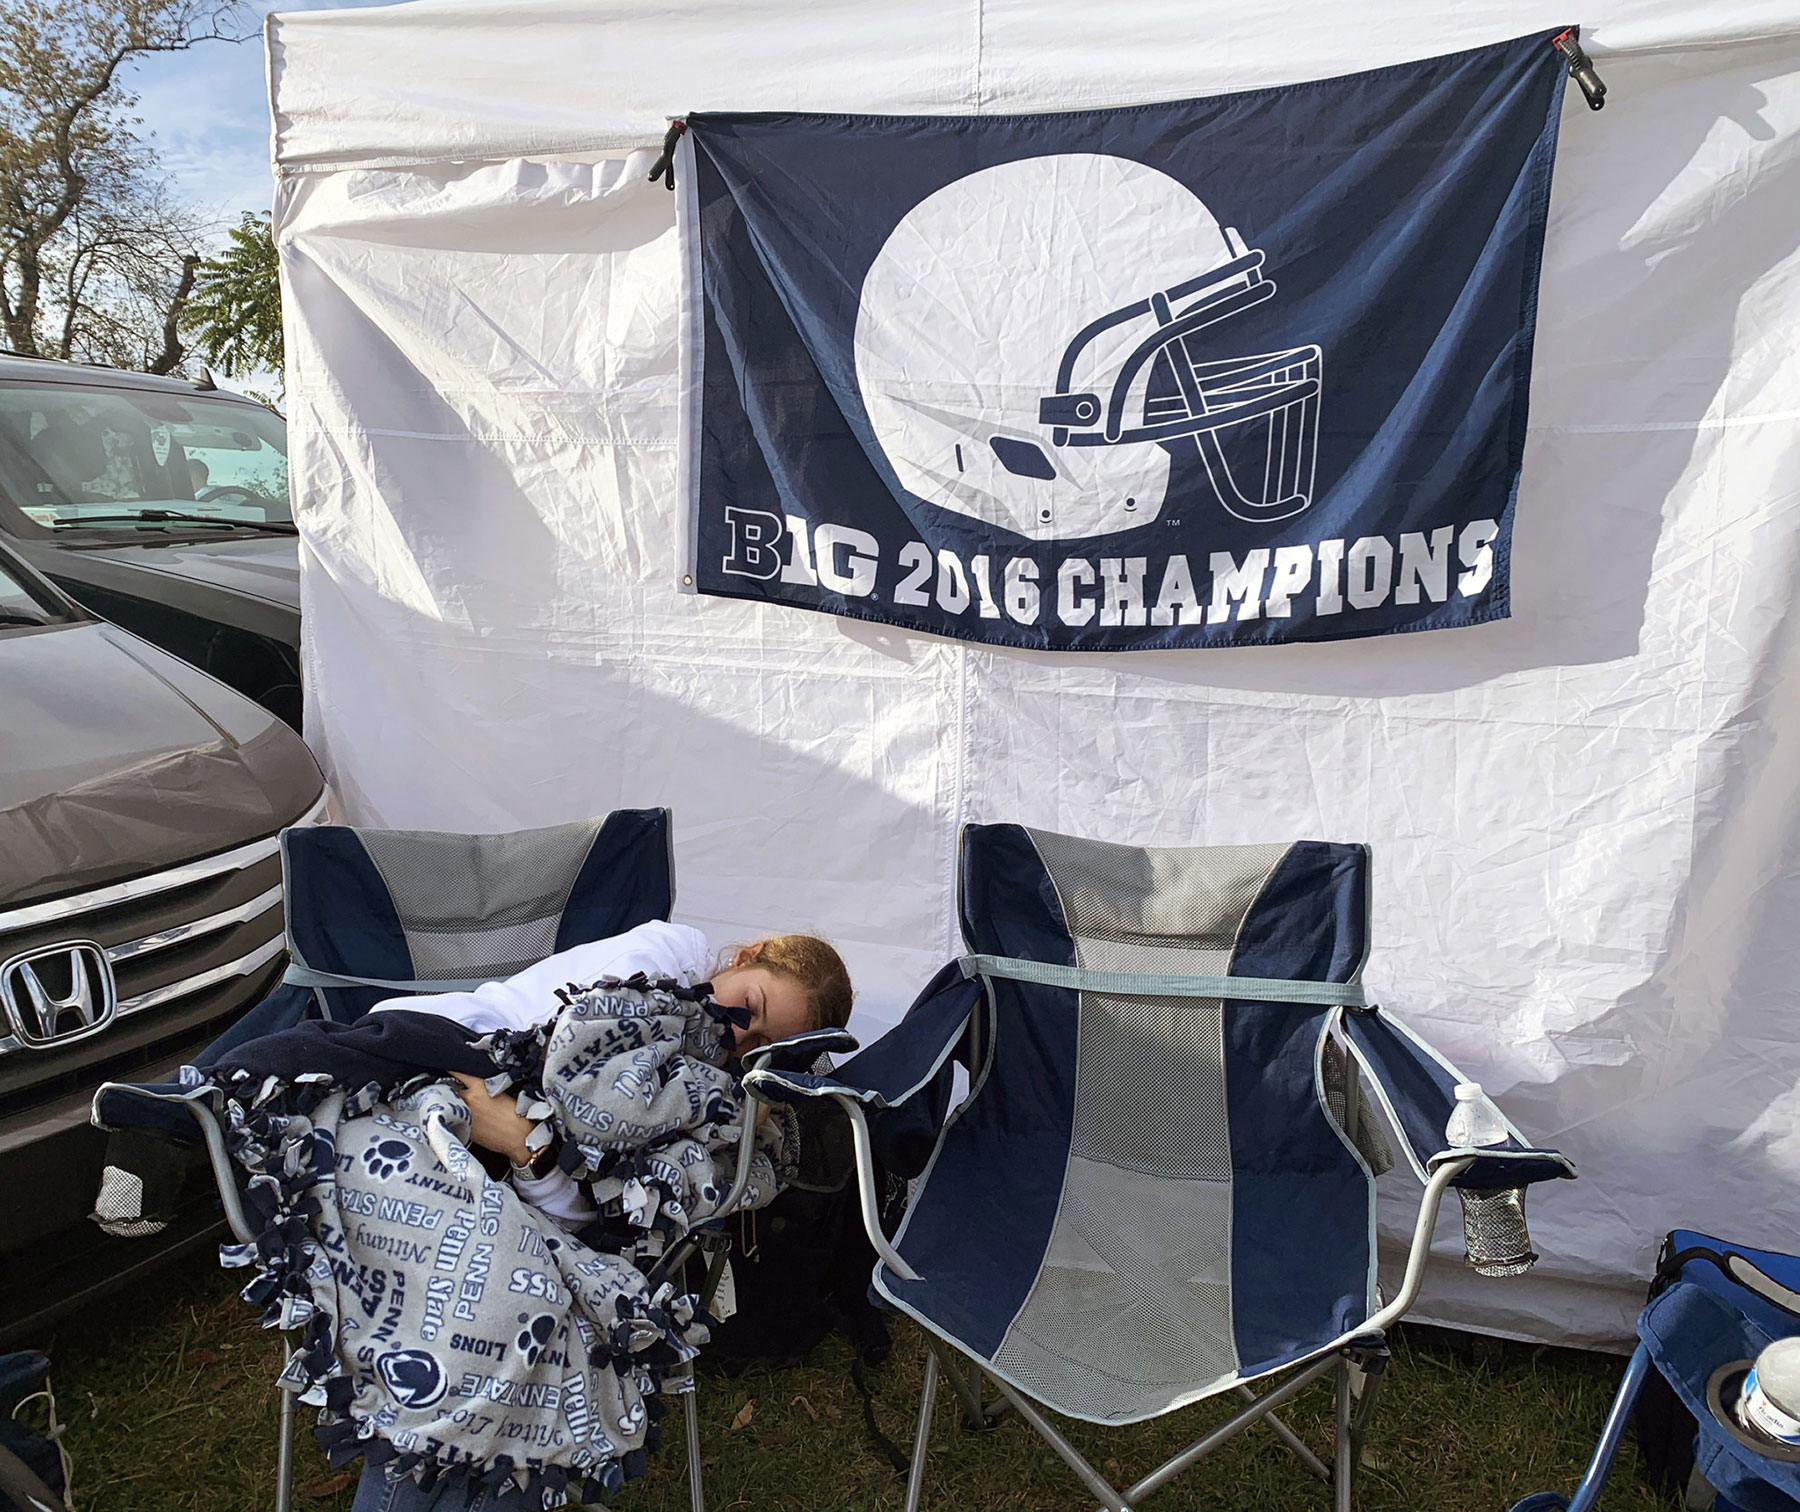 A young fan under a fleece Penn State blanket curls up in a camping chair for a quick nap during tailgating.